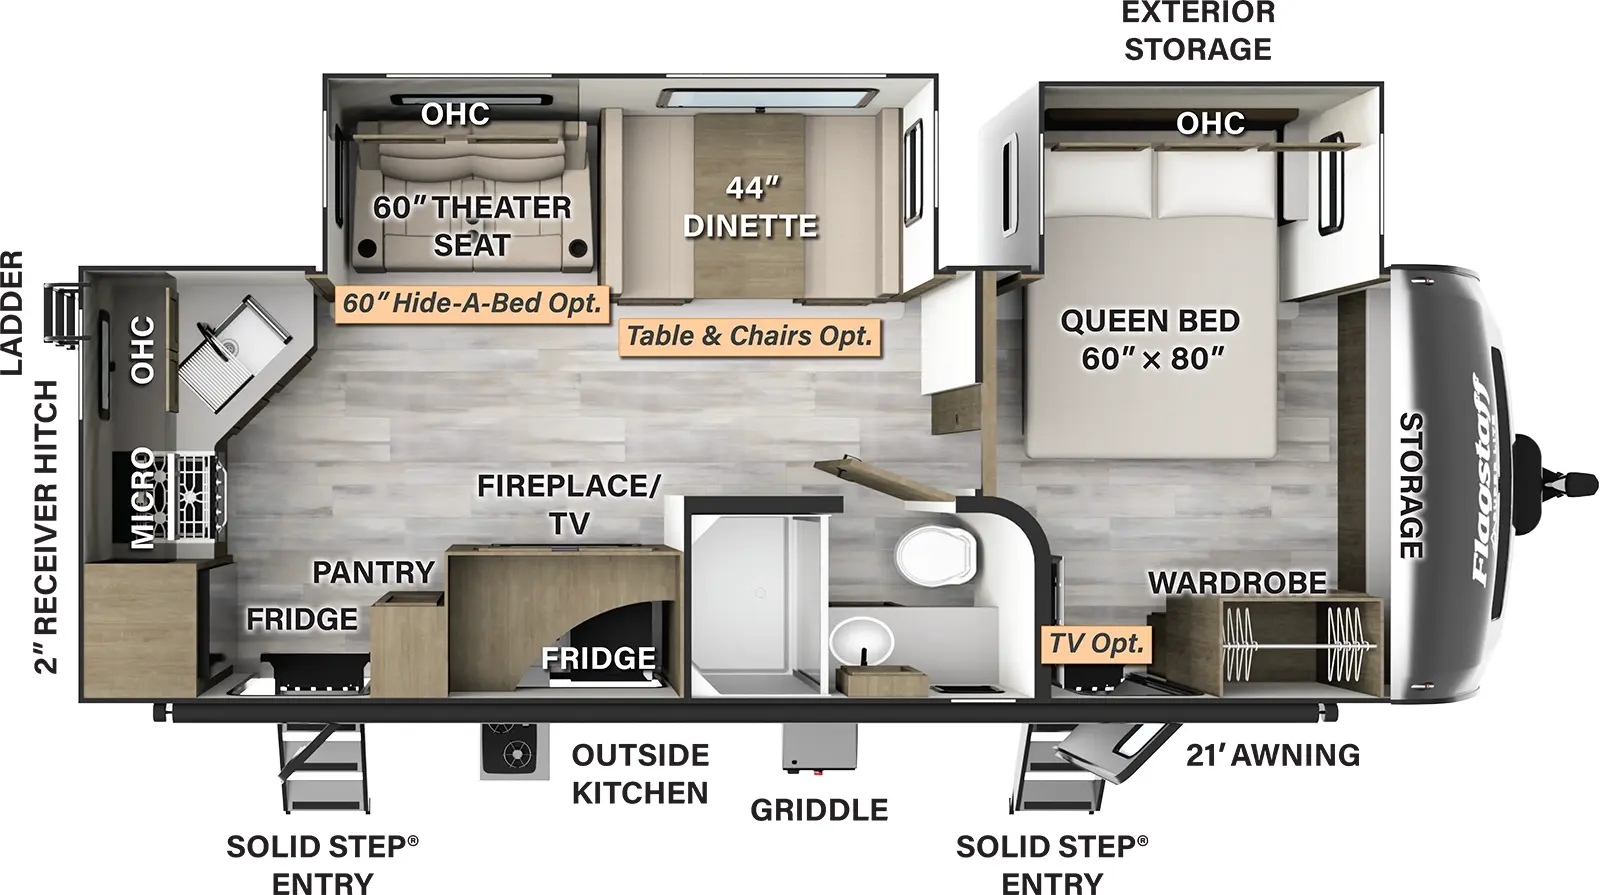 The 26RKBS has two slideouts and two entries. Exterior features a 21 foot awning, solid step entries, outside kitchen with refrigerator, exterior storage, griddle, rear ladder, and 2 inch receiver hitch. Interior layout front to back: front bedroom with front storage, door side entry and wardrobe, and off-door side queen bed slideout with overhead cabinets (TV optional); door side full bathroom; off-door side slideout with dinette (table and chairs optional) and theater seating (hide-a-bed optional) with overhead cabinet; door side TV and fireplace, pantry and second entry; rear kitchen with sink, microwave, cooktop, refrigerator, and overhead cabinets.